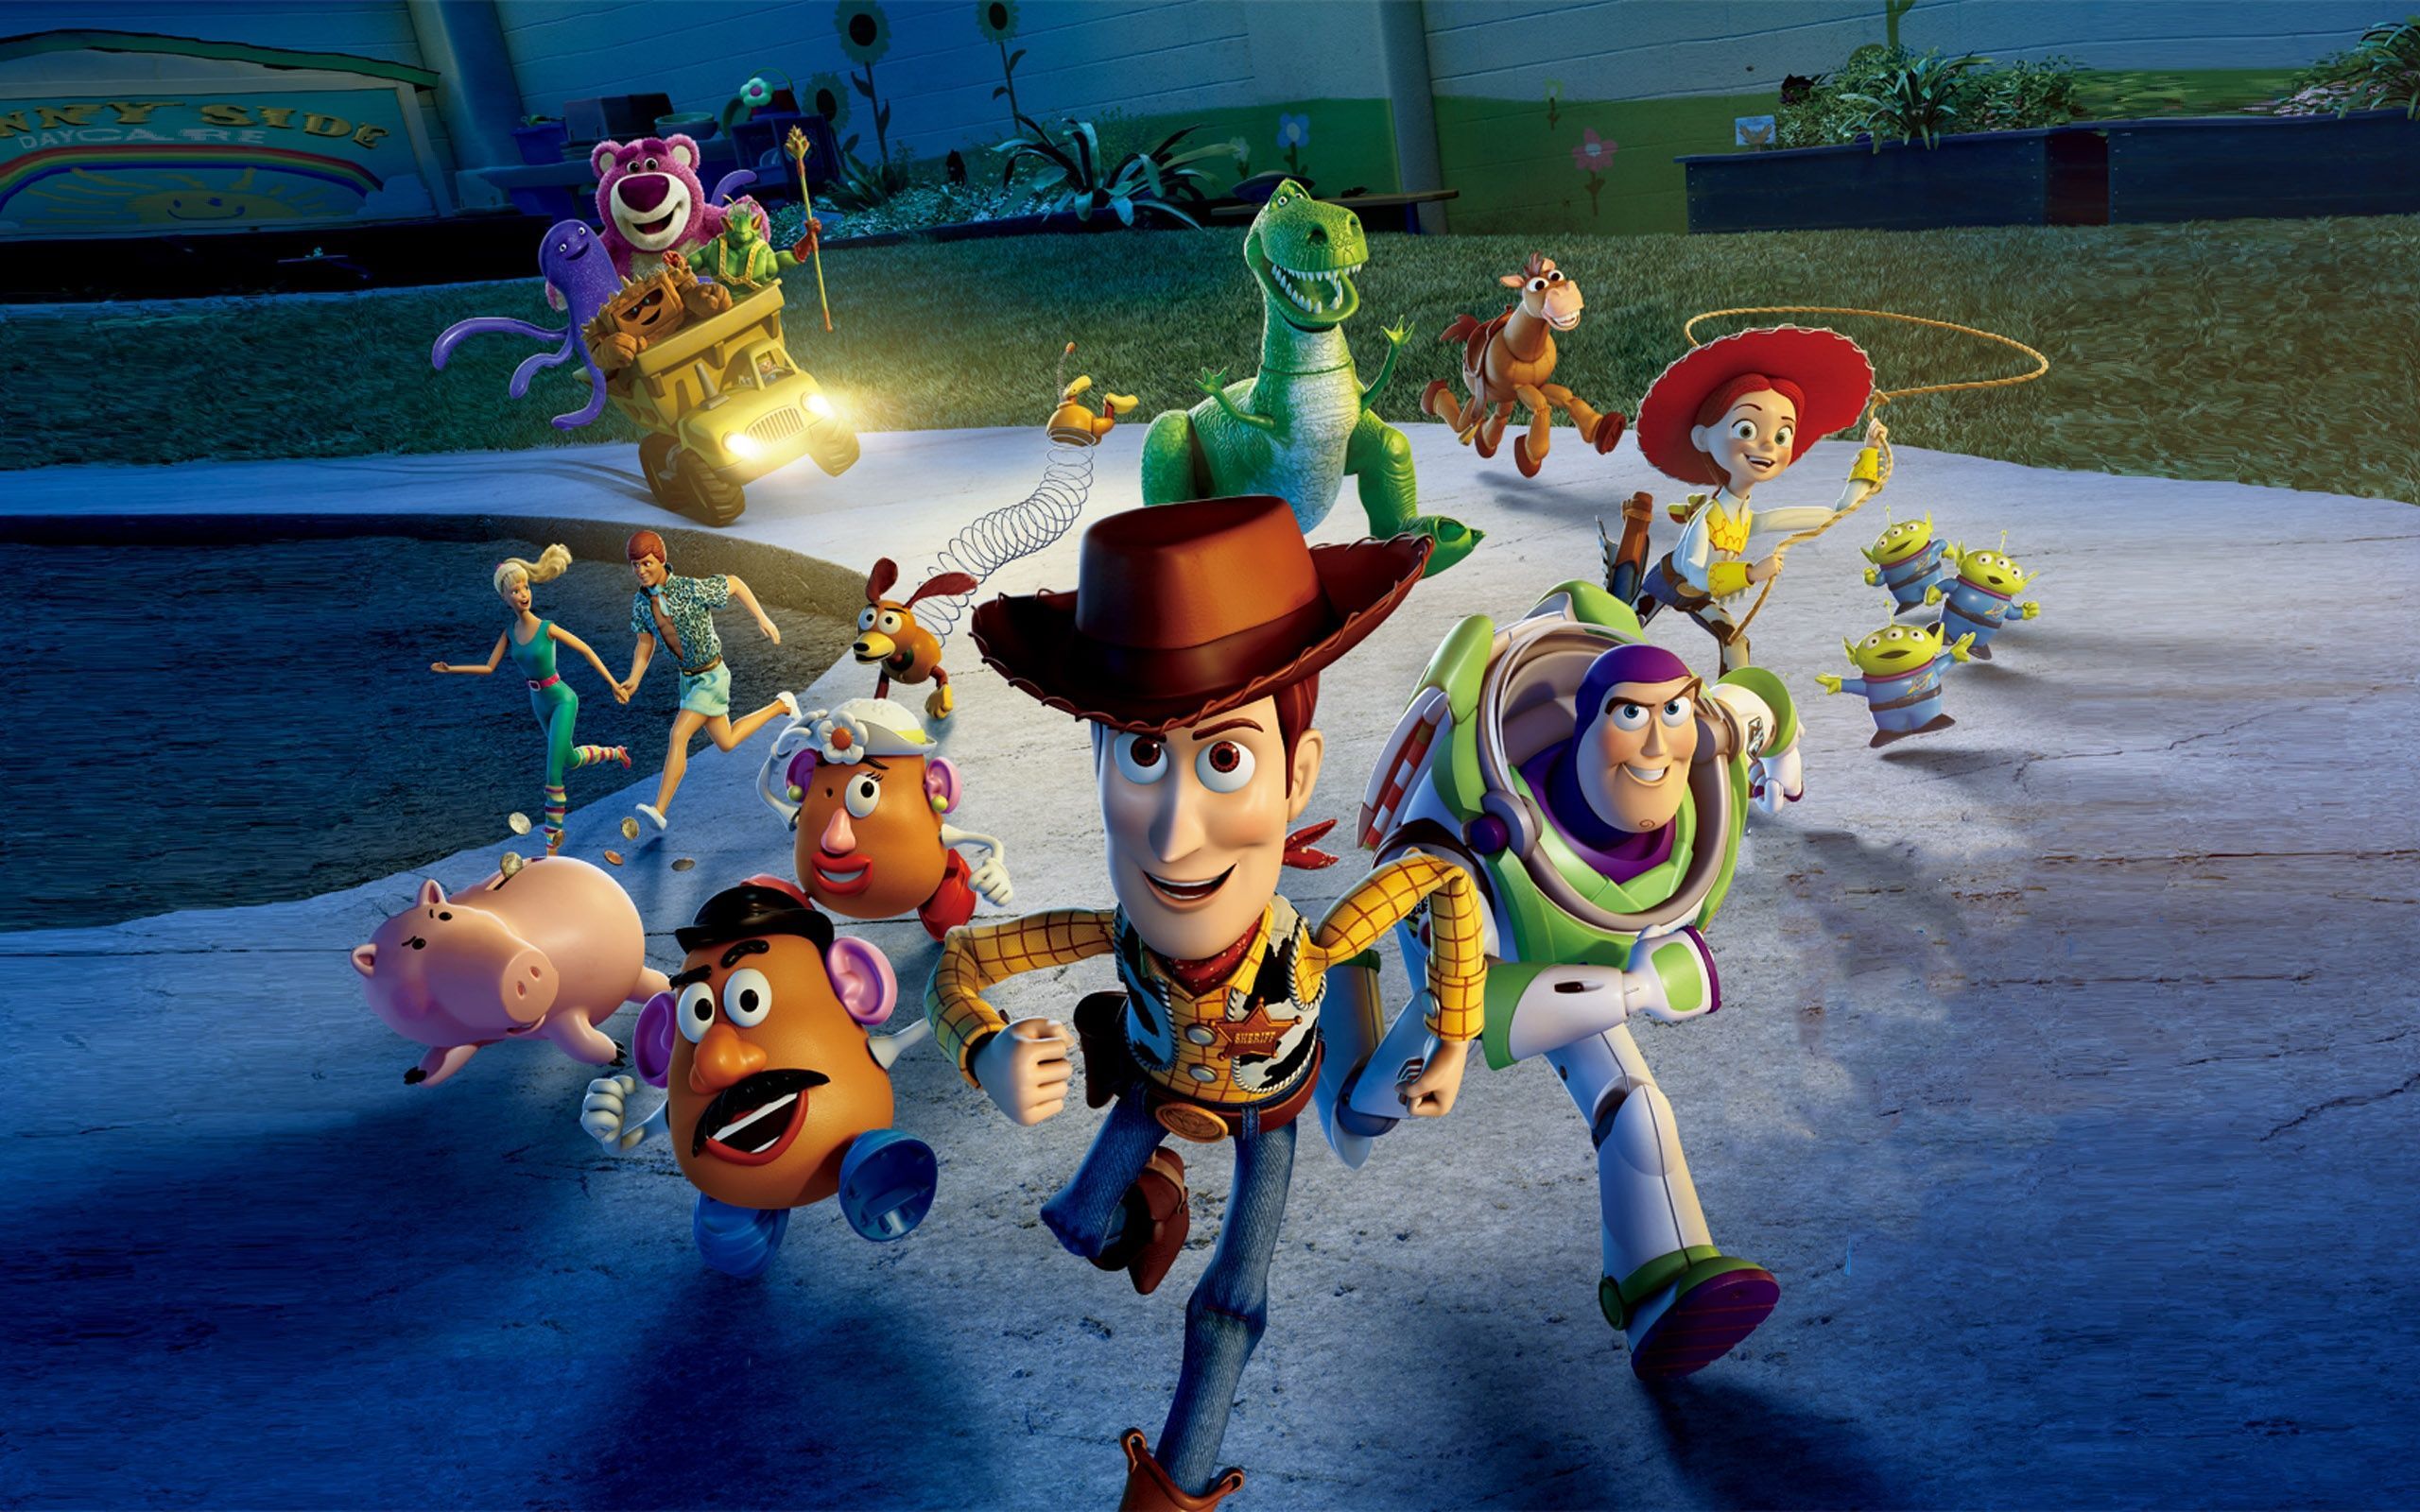 HD Toy Story 3 2010 Wallpaper - New Post has been published